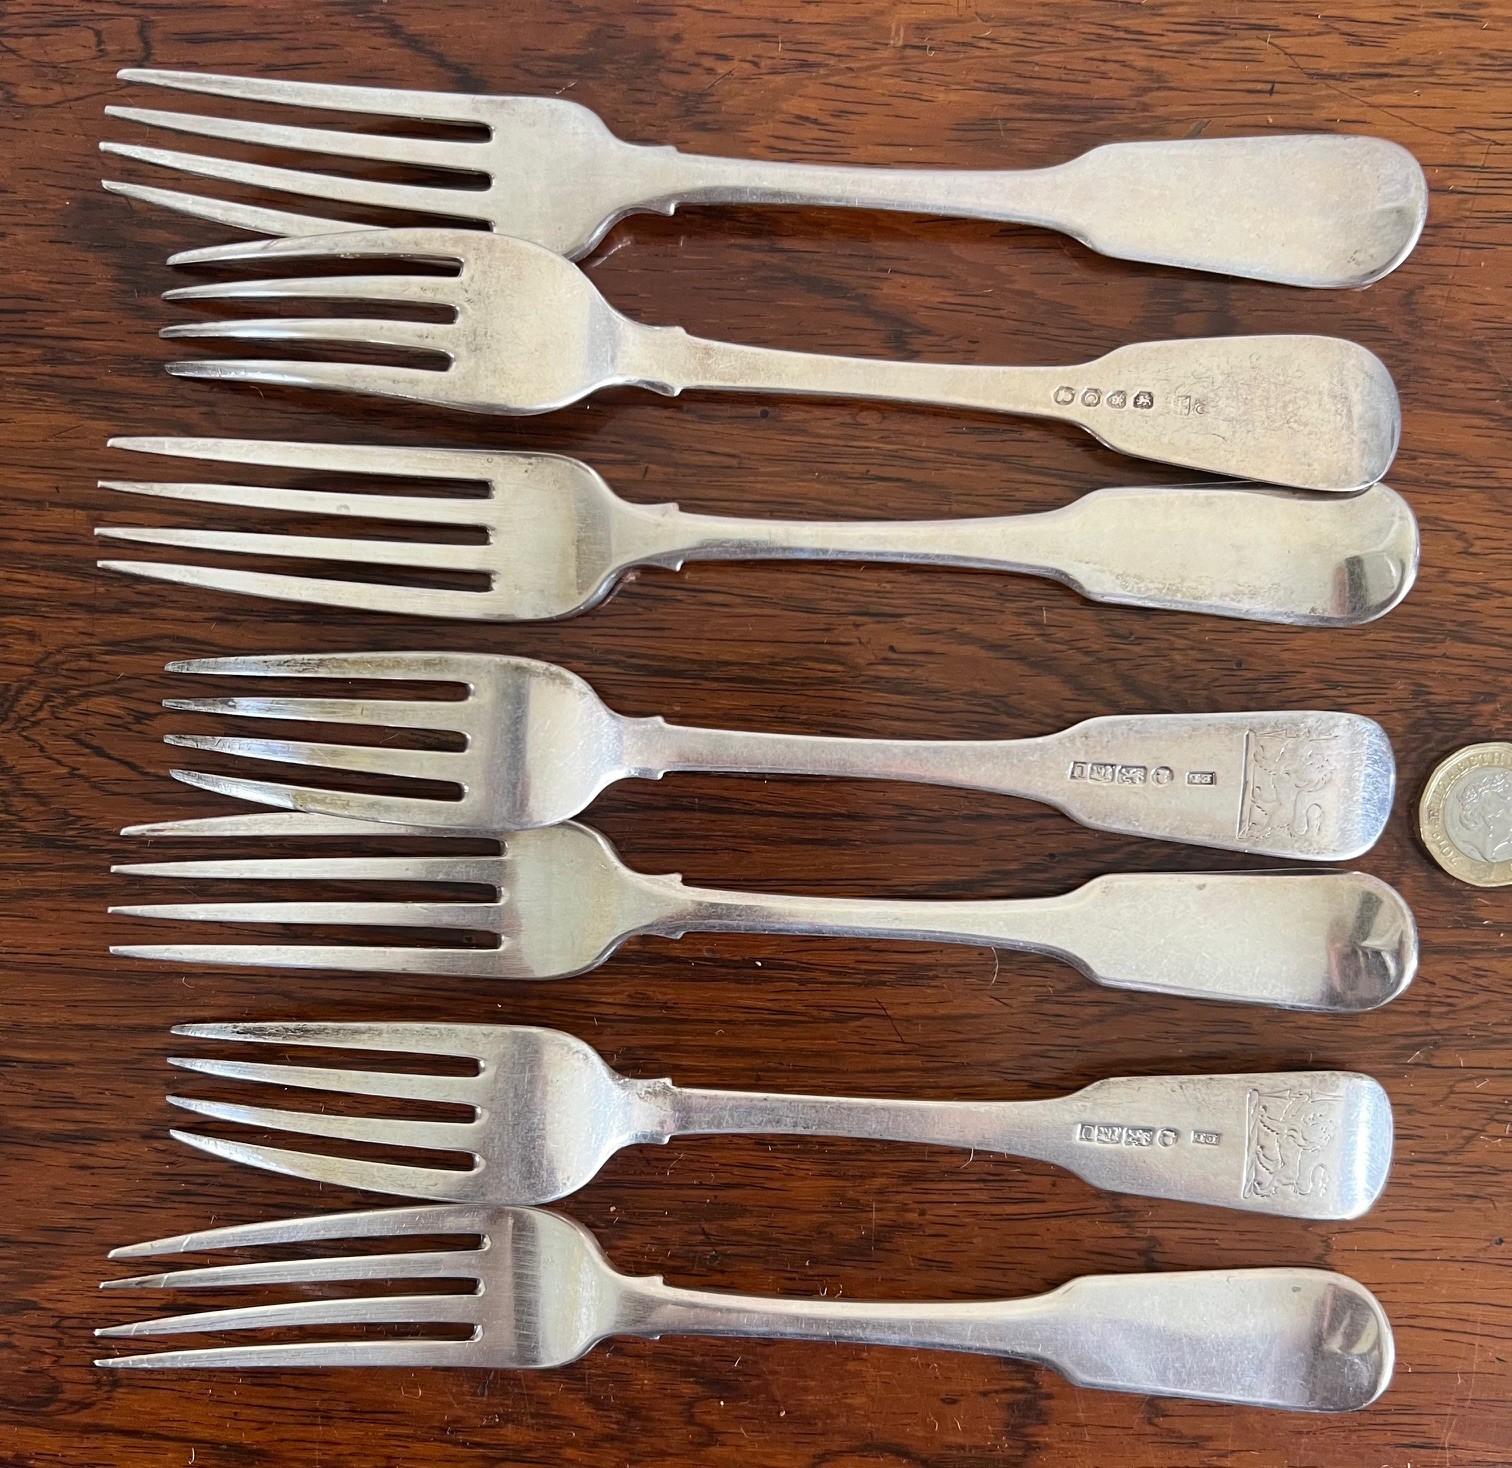 SIX SILVER DINNER FORKS, EXETER, 1836, WEIGHT APPROX 540g